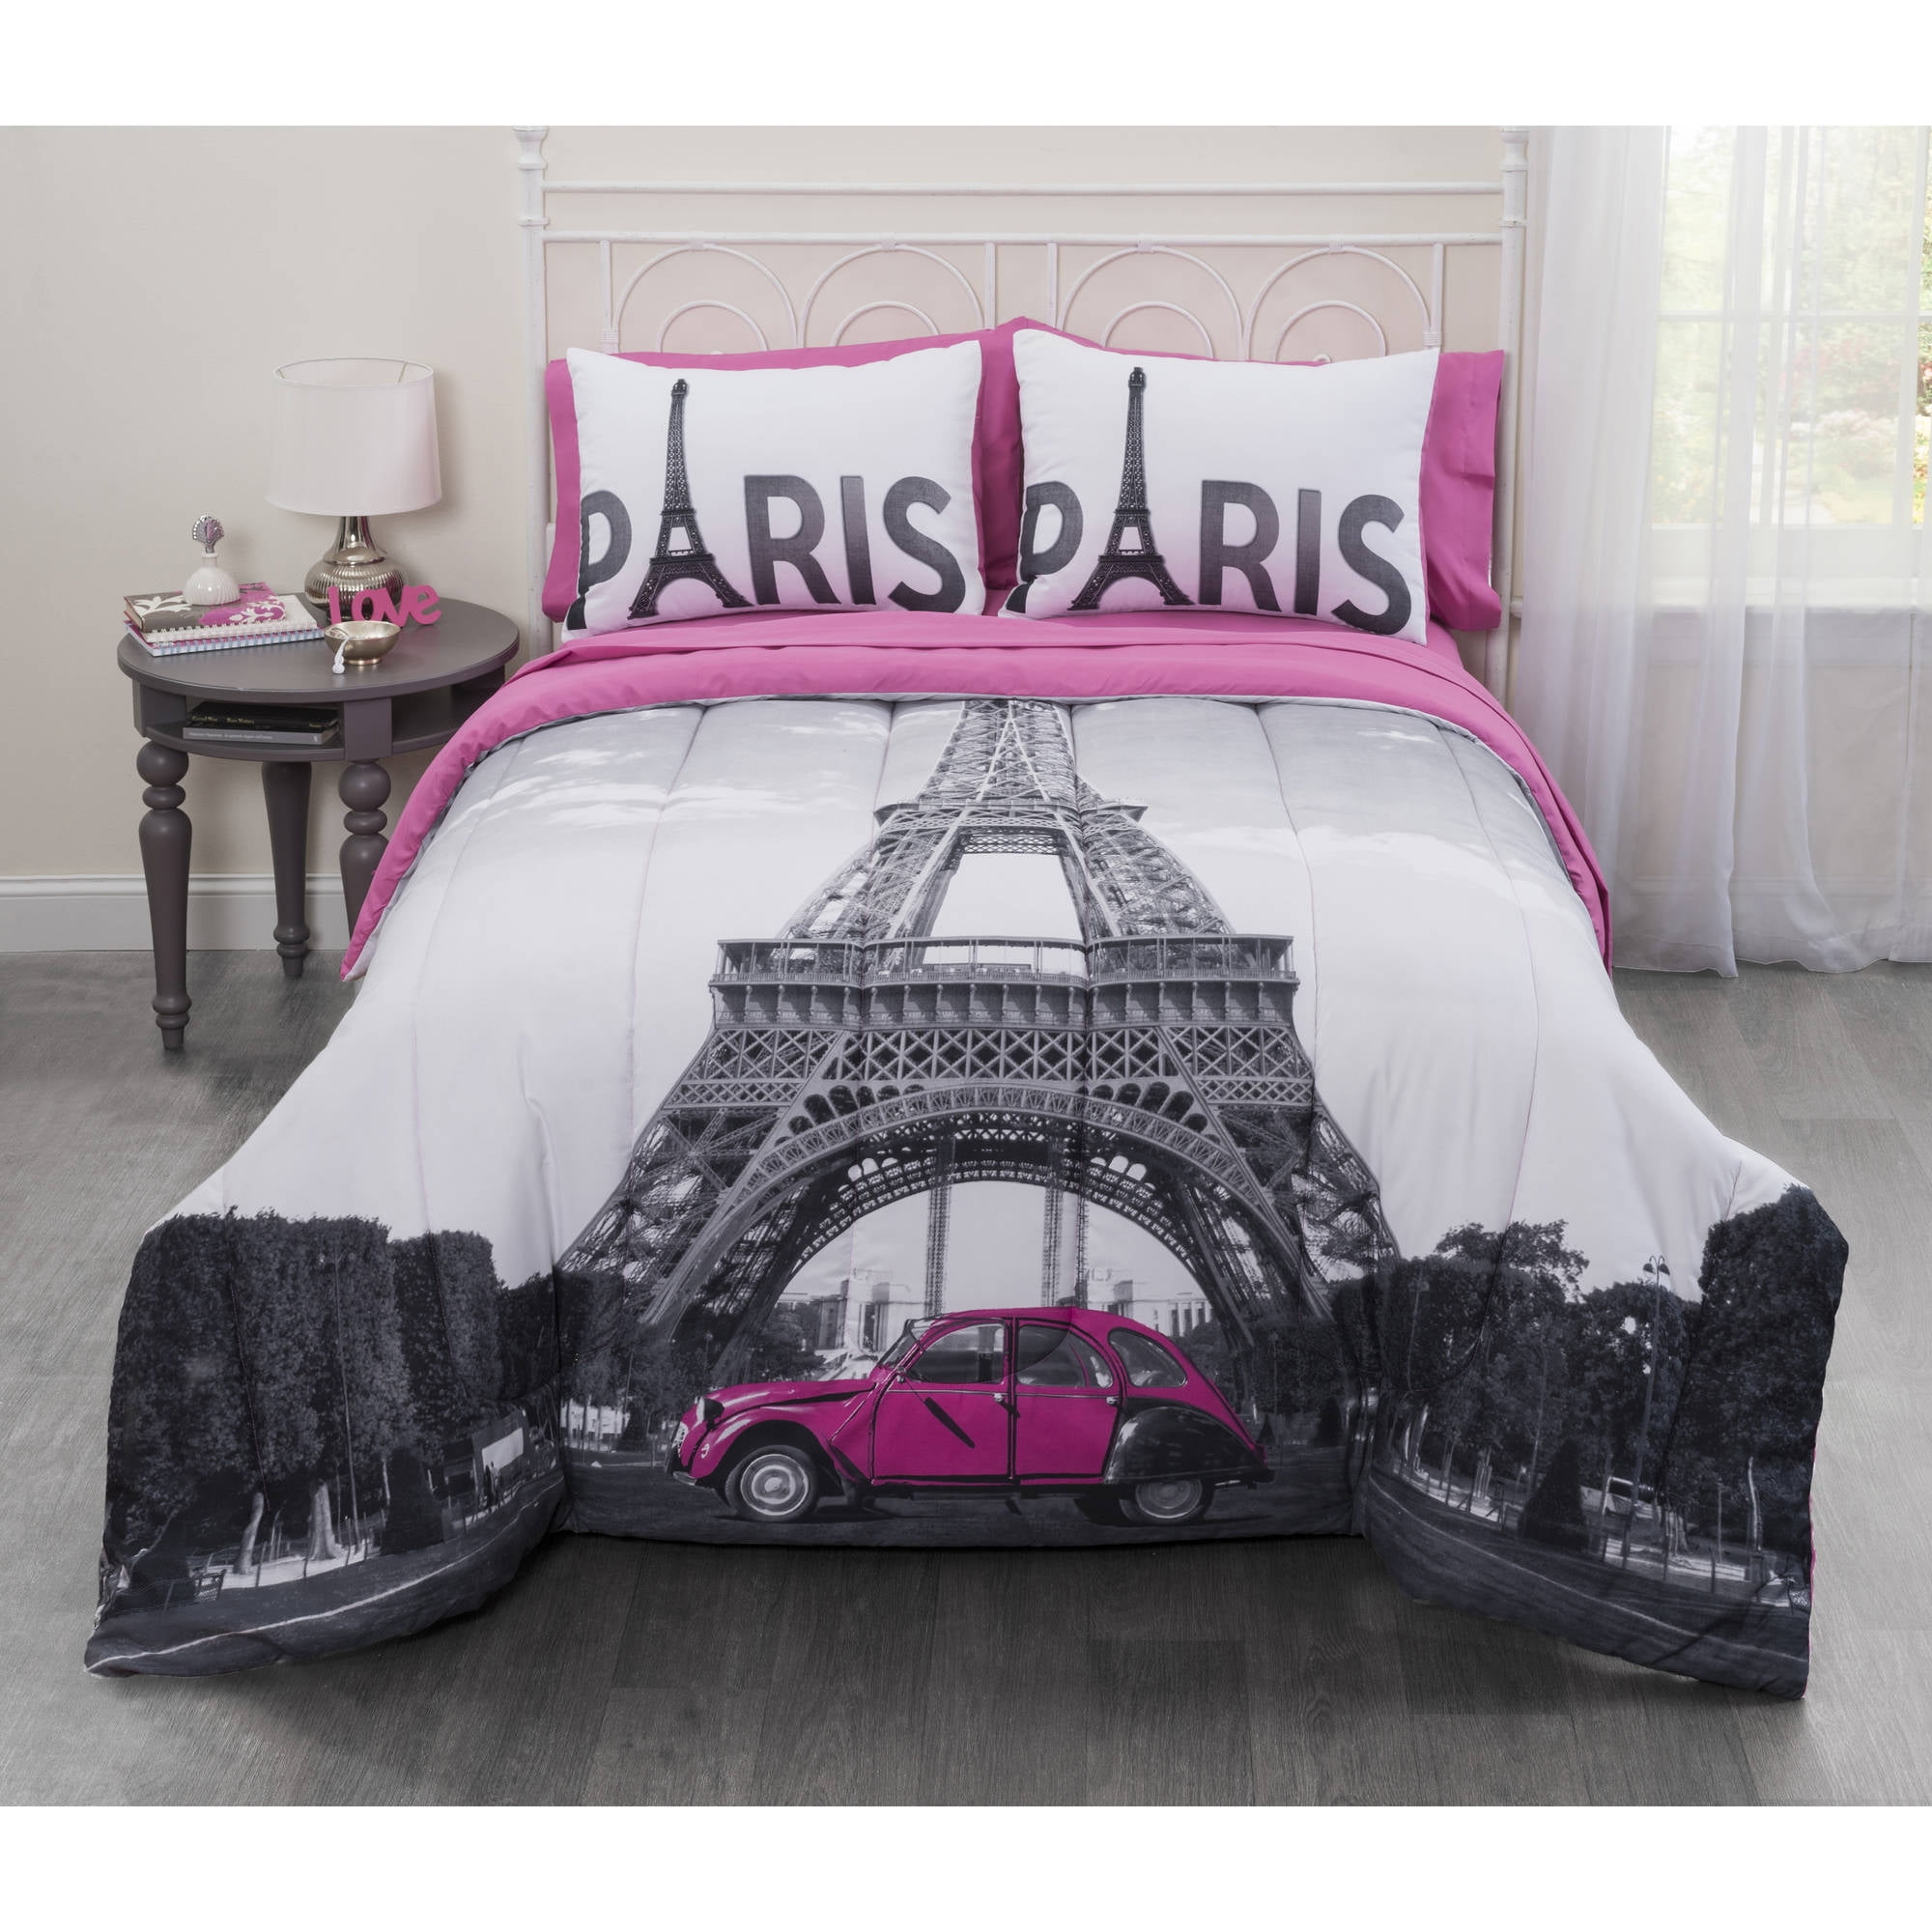 paris bed set raymour and flanigan